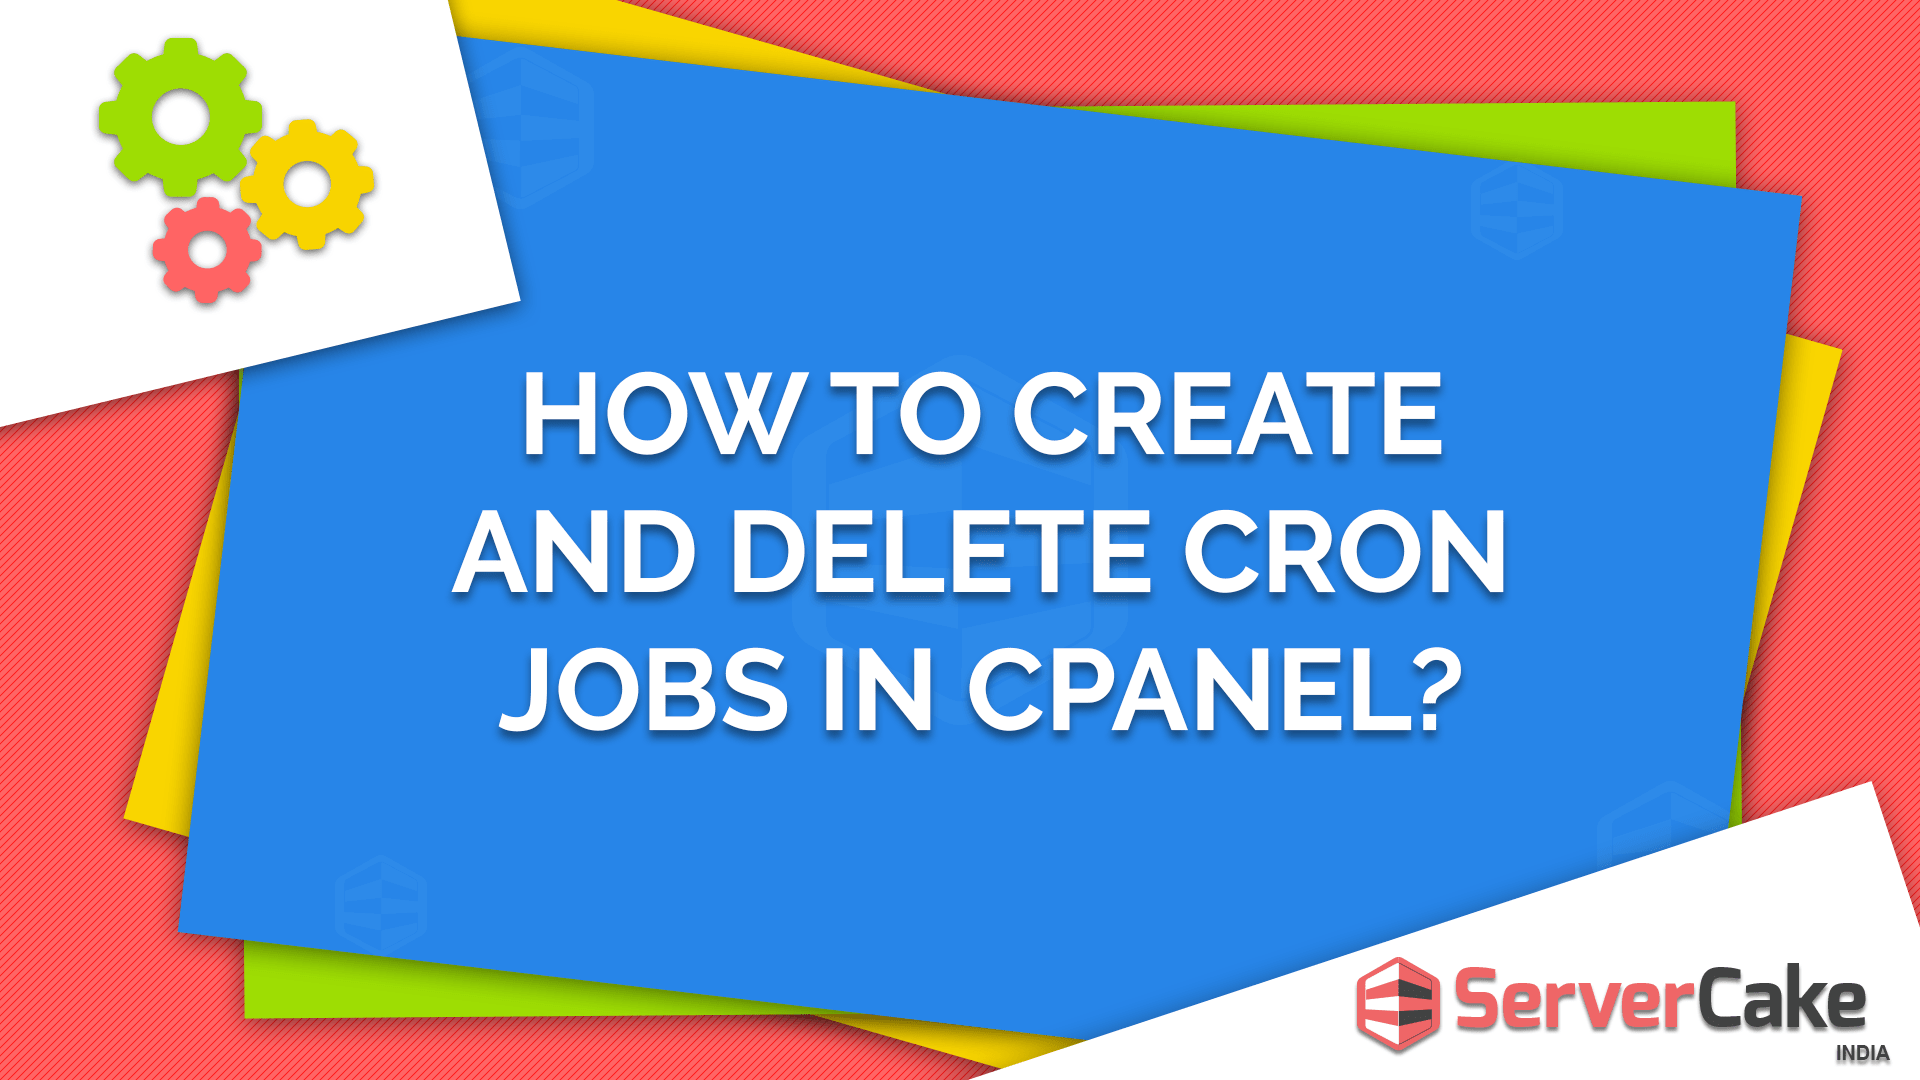 How to Create and Delete Cron Job in cPanel